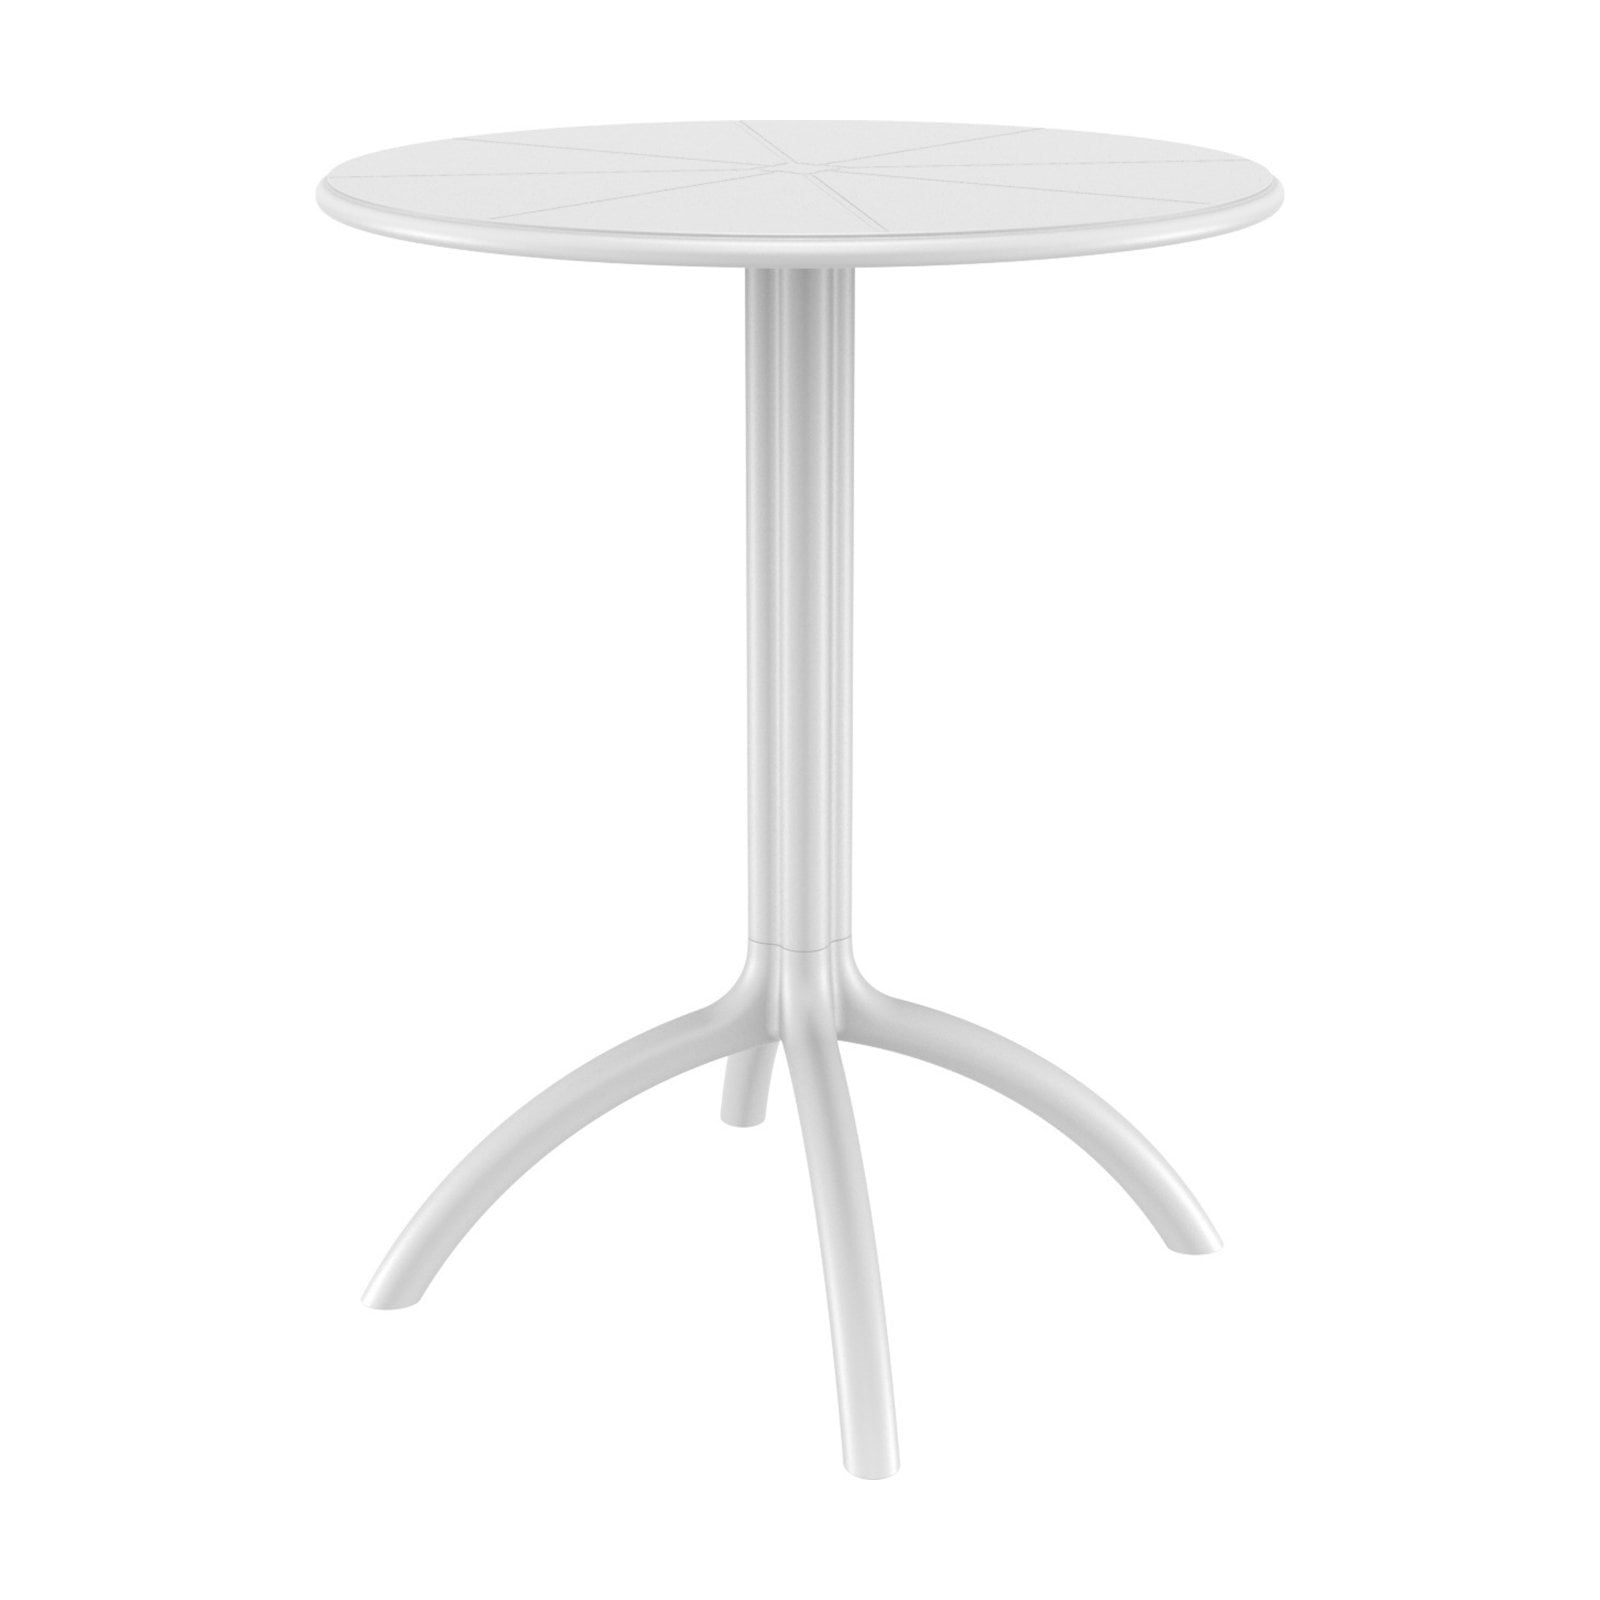 Isp160-whi Octopus Round Bistro Table, White